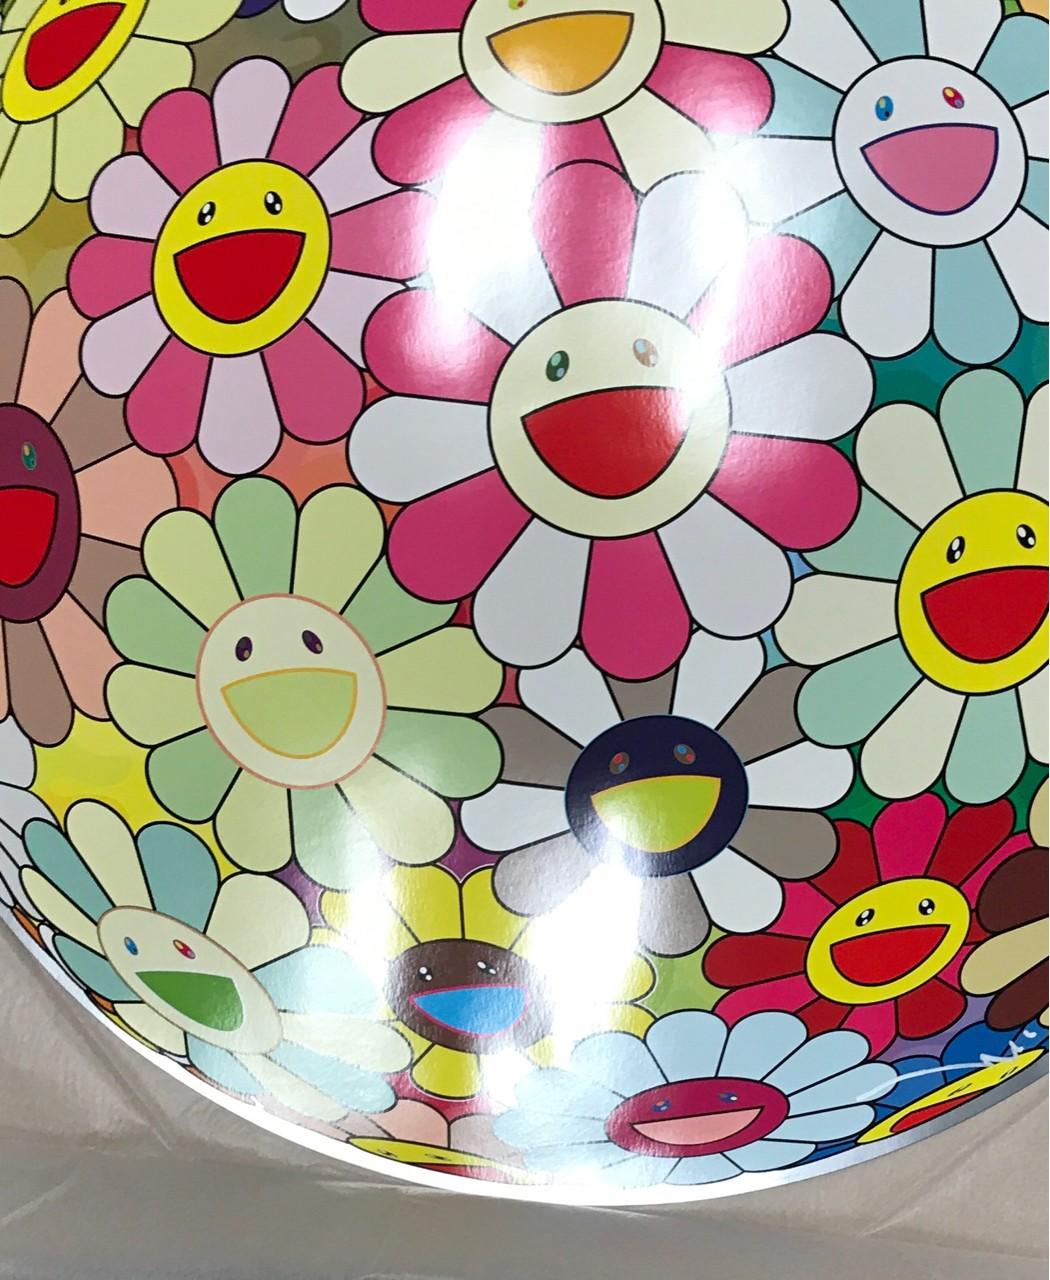 Flowerball Margareth (3D). Limited edition (print) by Murakami signed, numbered - Pop Art Print by Takashi Murakami